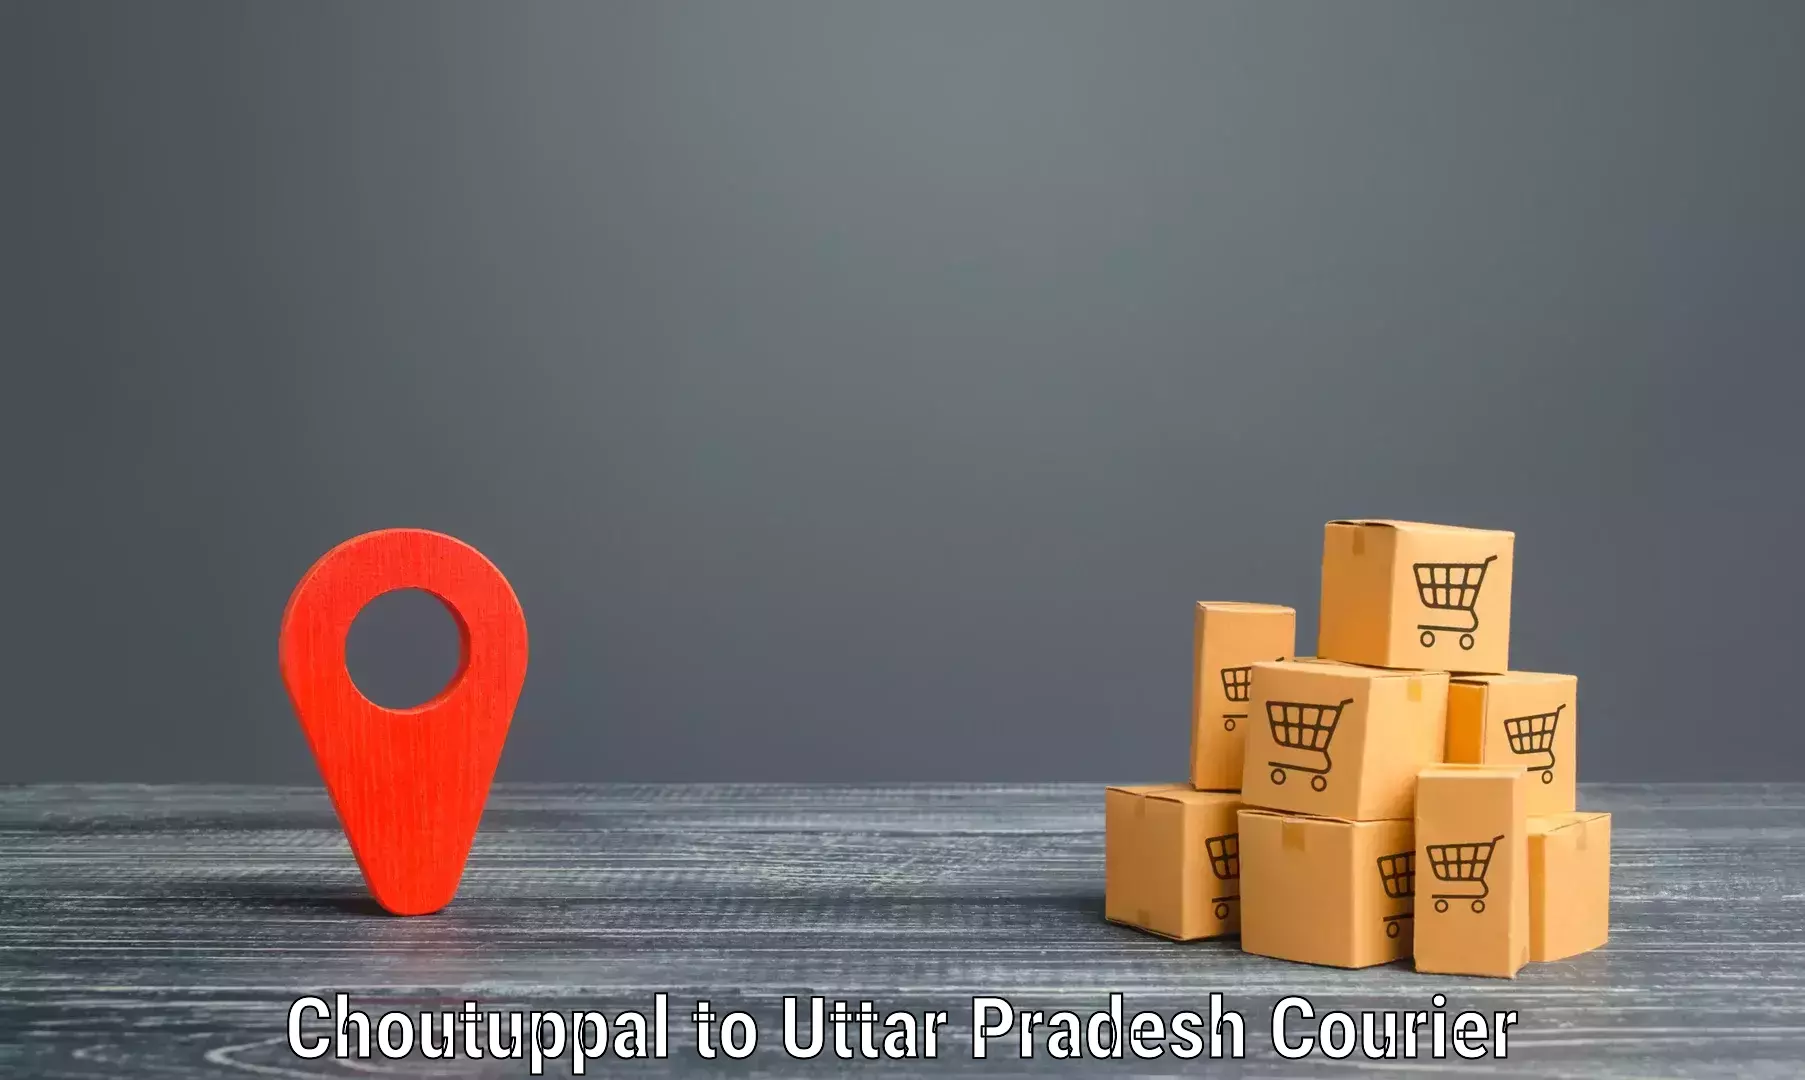 Nationwide delivery network Choutuppal to Bhadohi